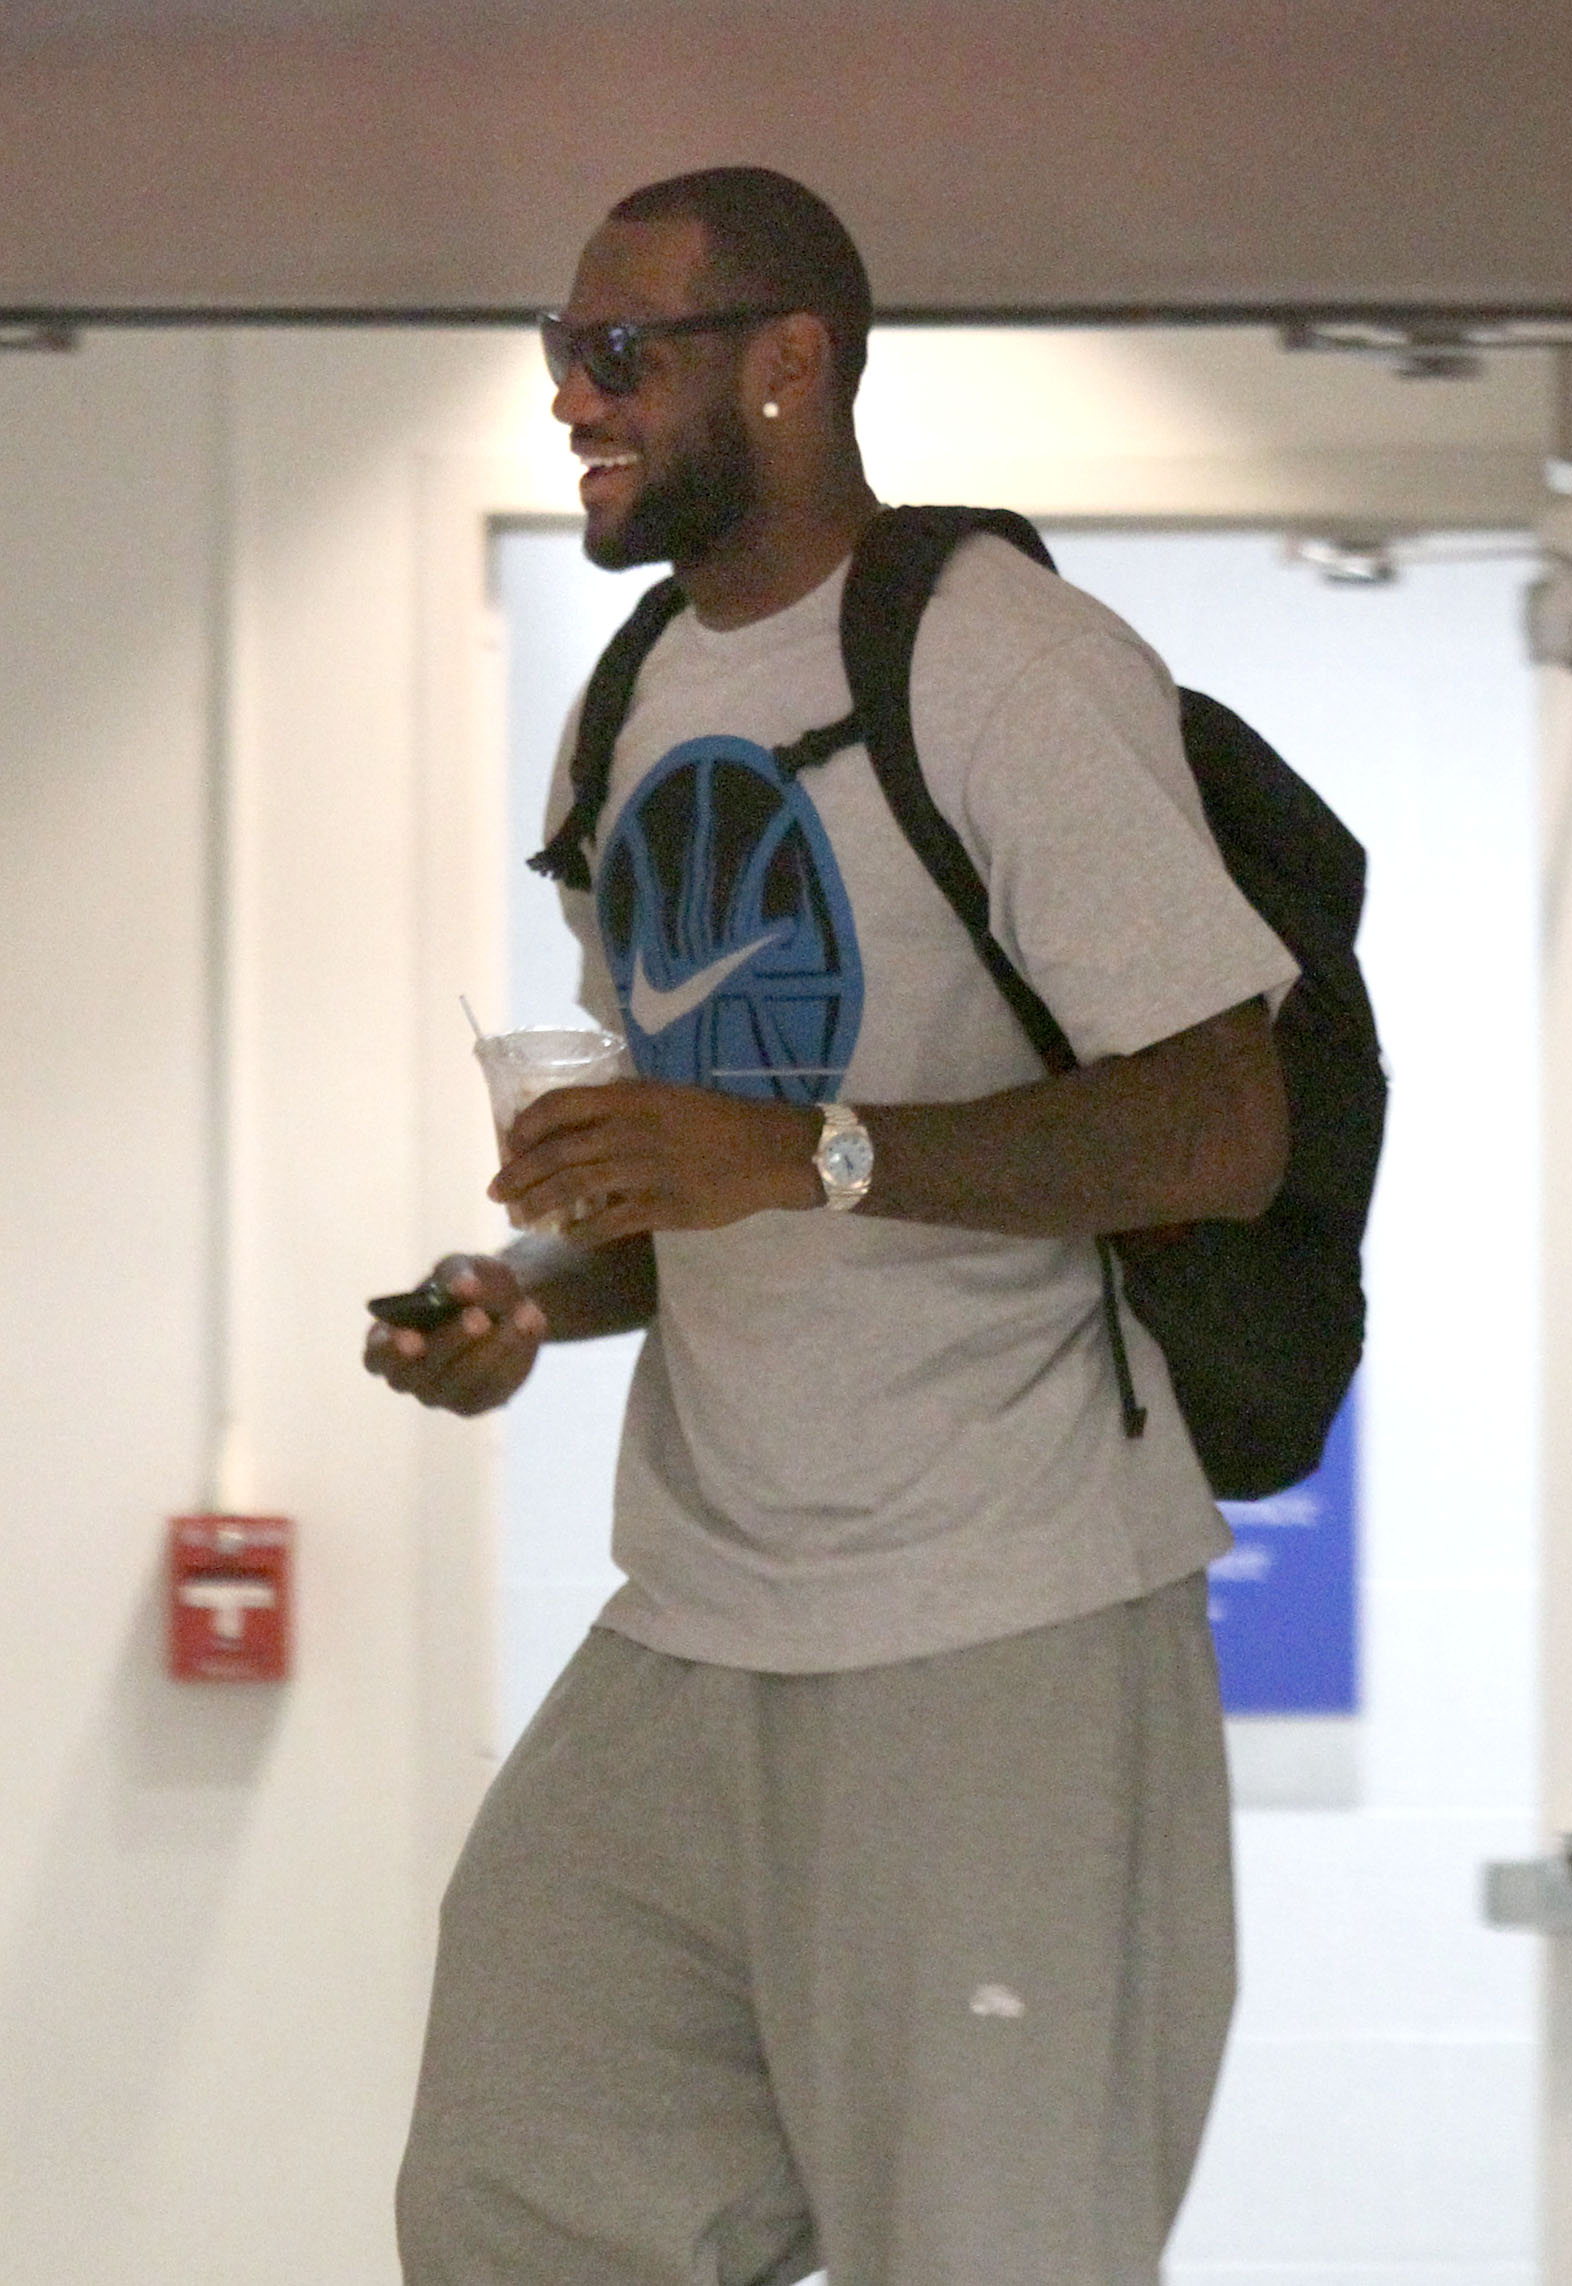 LeBron James makes his way through the IMG building to talk with the Miami Heat Friday, July 2, 2010 in Cleveland. (Joshua Gunter/The Plain Dealer)